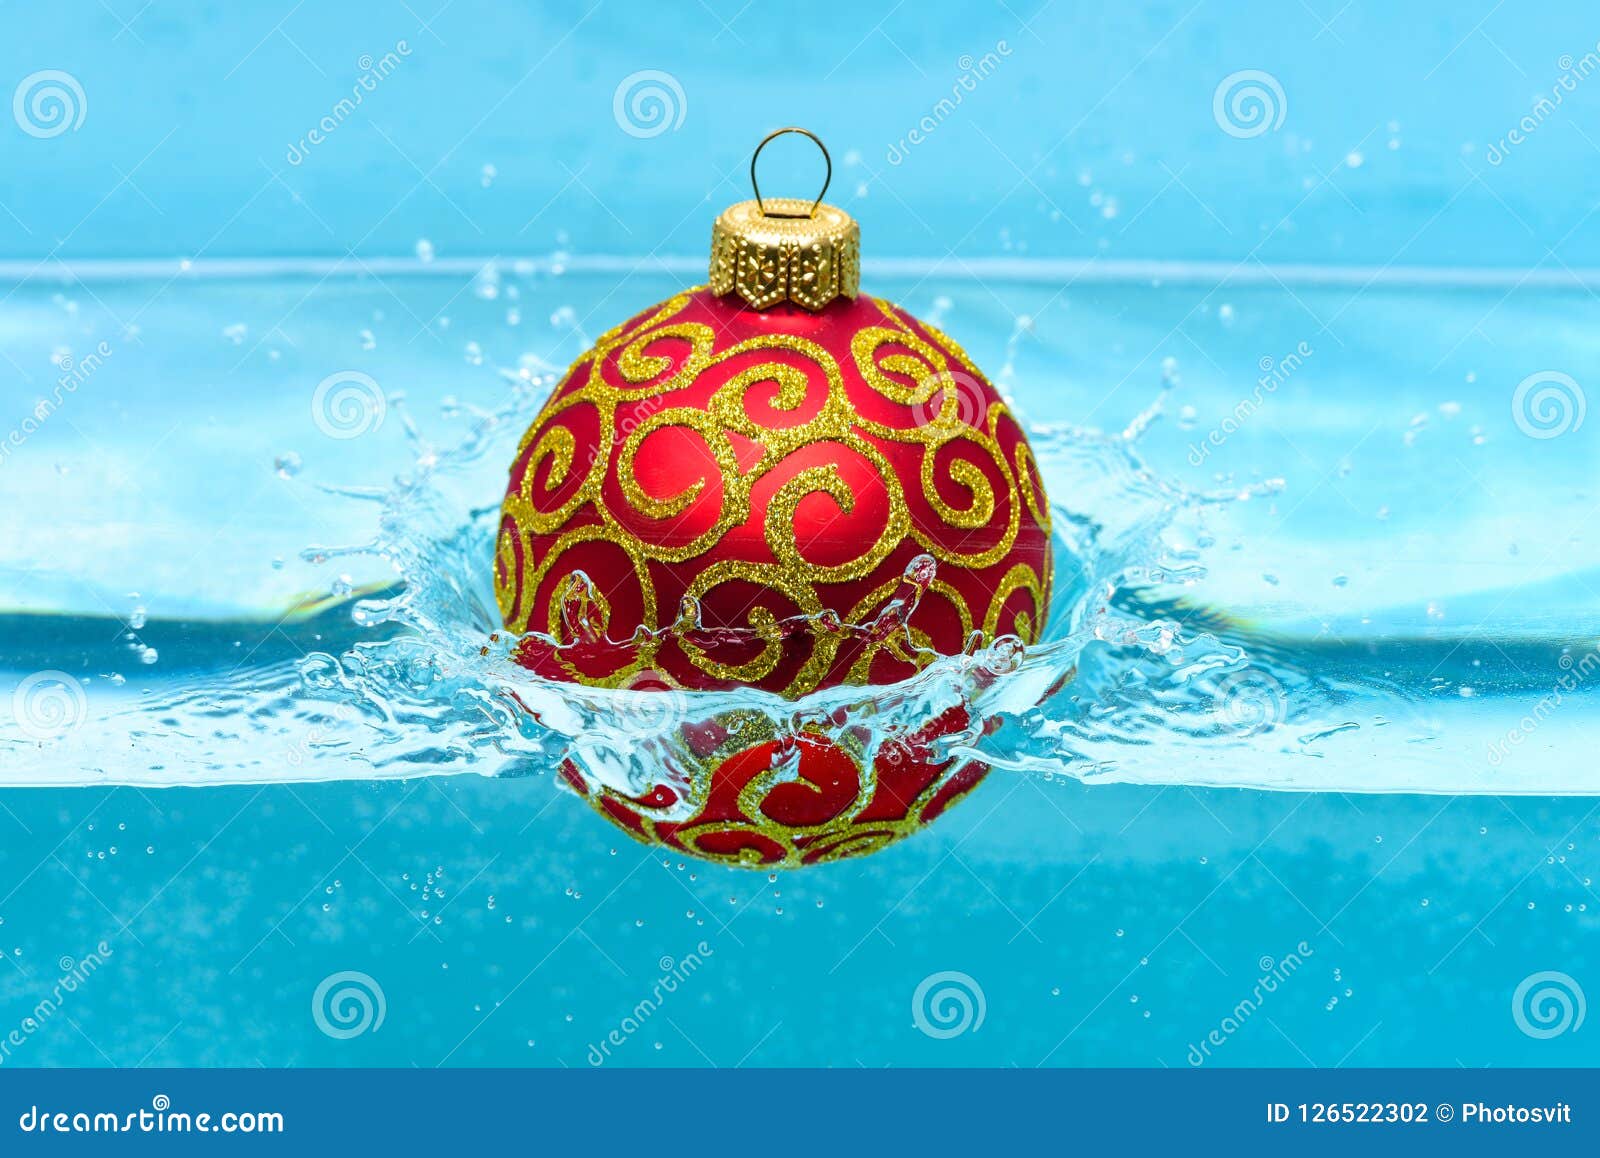 Holidays And Vacation Concept. Festive Decoration For Christmas Tree, Red Ball With Glitter ...